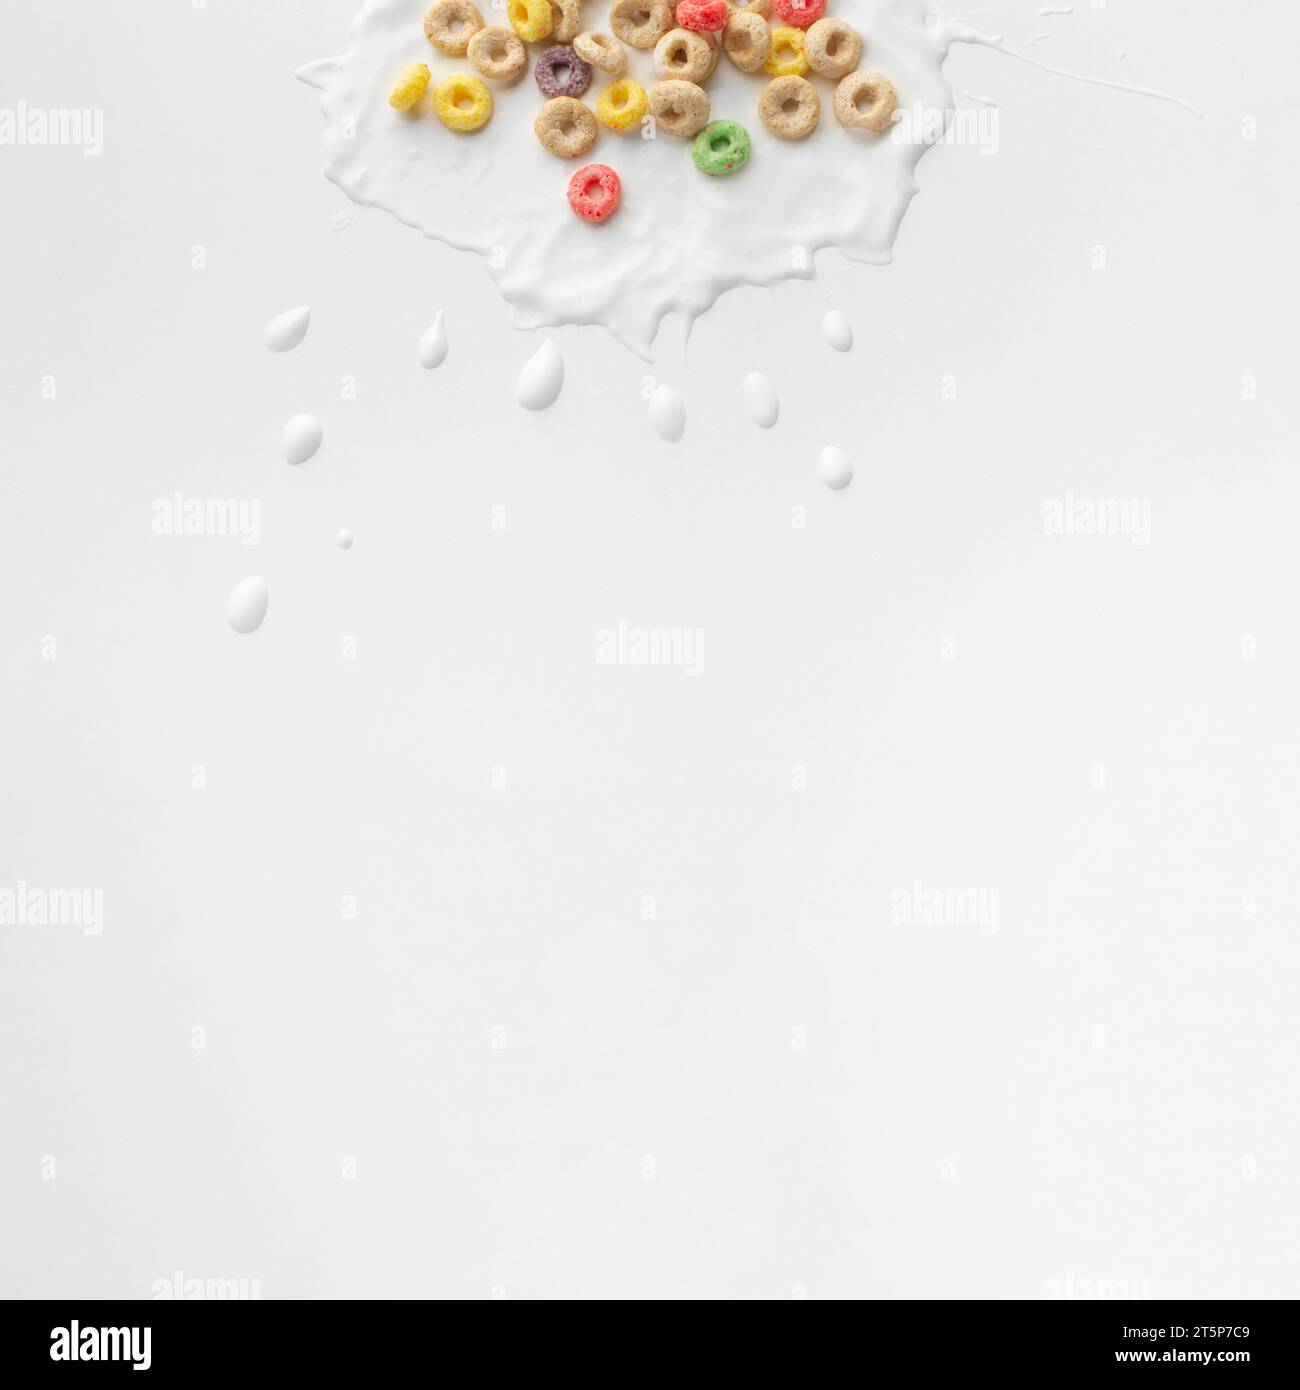 Arrangement colorful cereal with copy space Stock Photo